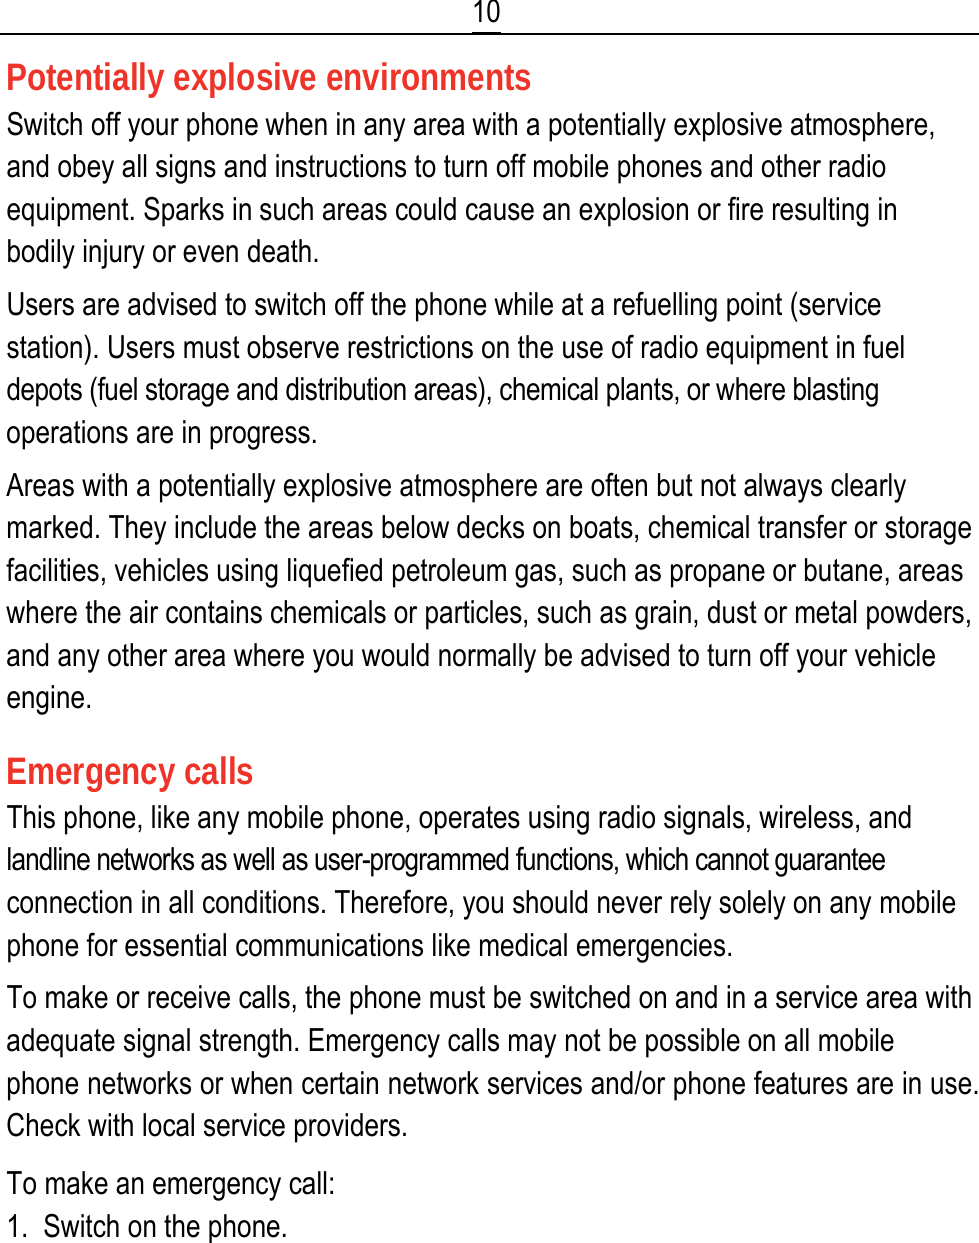  10 Potentially explosive environments Switch off your phone when in any area with a potentially explosive atmosphere, and obey all signs and instructions to turn off mobile phones and other radio equipment. Sparks in such areas could cause an explosion or fire resulting in bodily injury or even death. Users are advised to switch off the phone while at a refuelling point (service station). Users must observe restrictions on the use of radio equipment in fuel depots (fuel storage and distribution areas), chemical plants, or where blasting operations are in progress. Areas with a potentially explosive atmosphere are often but not always clearly marked. They include the areas below decks on boats, chemical transfer or storage facilities, vehicles using liquefied petroleum gas, such as propane or butane, areas where the air contains chemicals or particles, such as grain, dust or metal powders, and any other area where you would normally be advised to turn off your vehicle engine. Emergency calls This phone, like any mobile phone, operates using radio signals, wireless, and landline networks as well as user-programmed functions, which cannot guarantee connection in all conditions. Therefore, you should never rely solely on any mobile phone for essential communications like medical emergencies. To make or receive calls, the phone must be switched on and in a service area with adequate signal strength. Emergency calls may not be possible on all mobile phone networks or when certain network services and/or phone features are in use. Check with local service providers. To make an emergency call: 1.  Switch on the phone. 